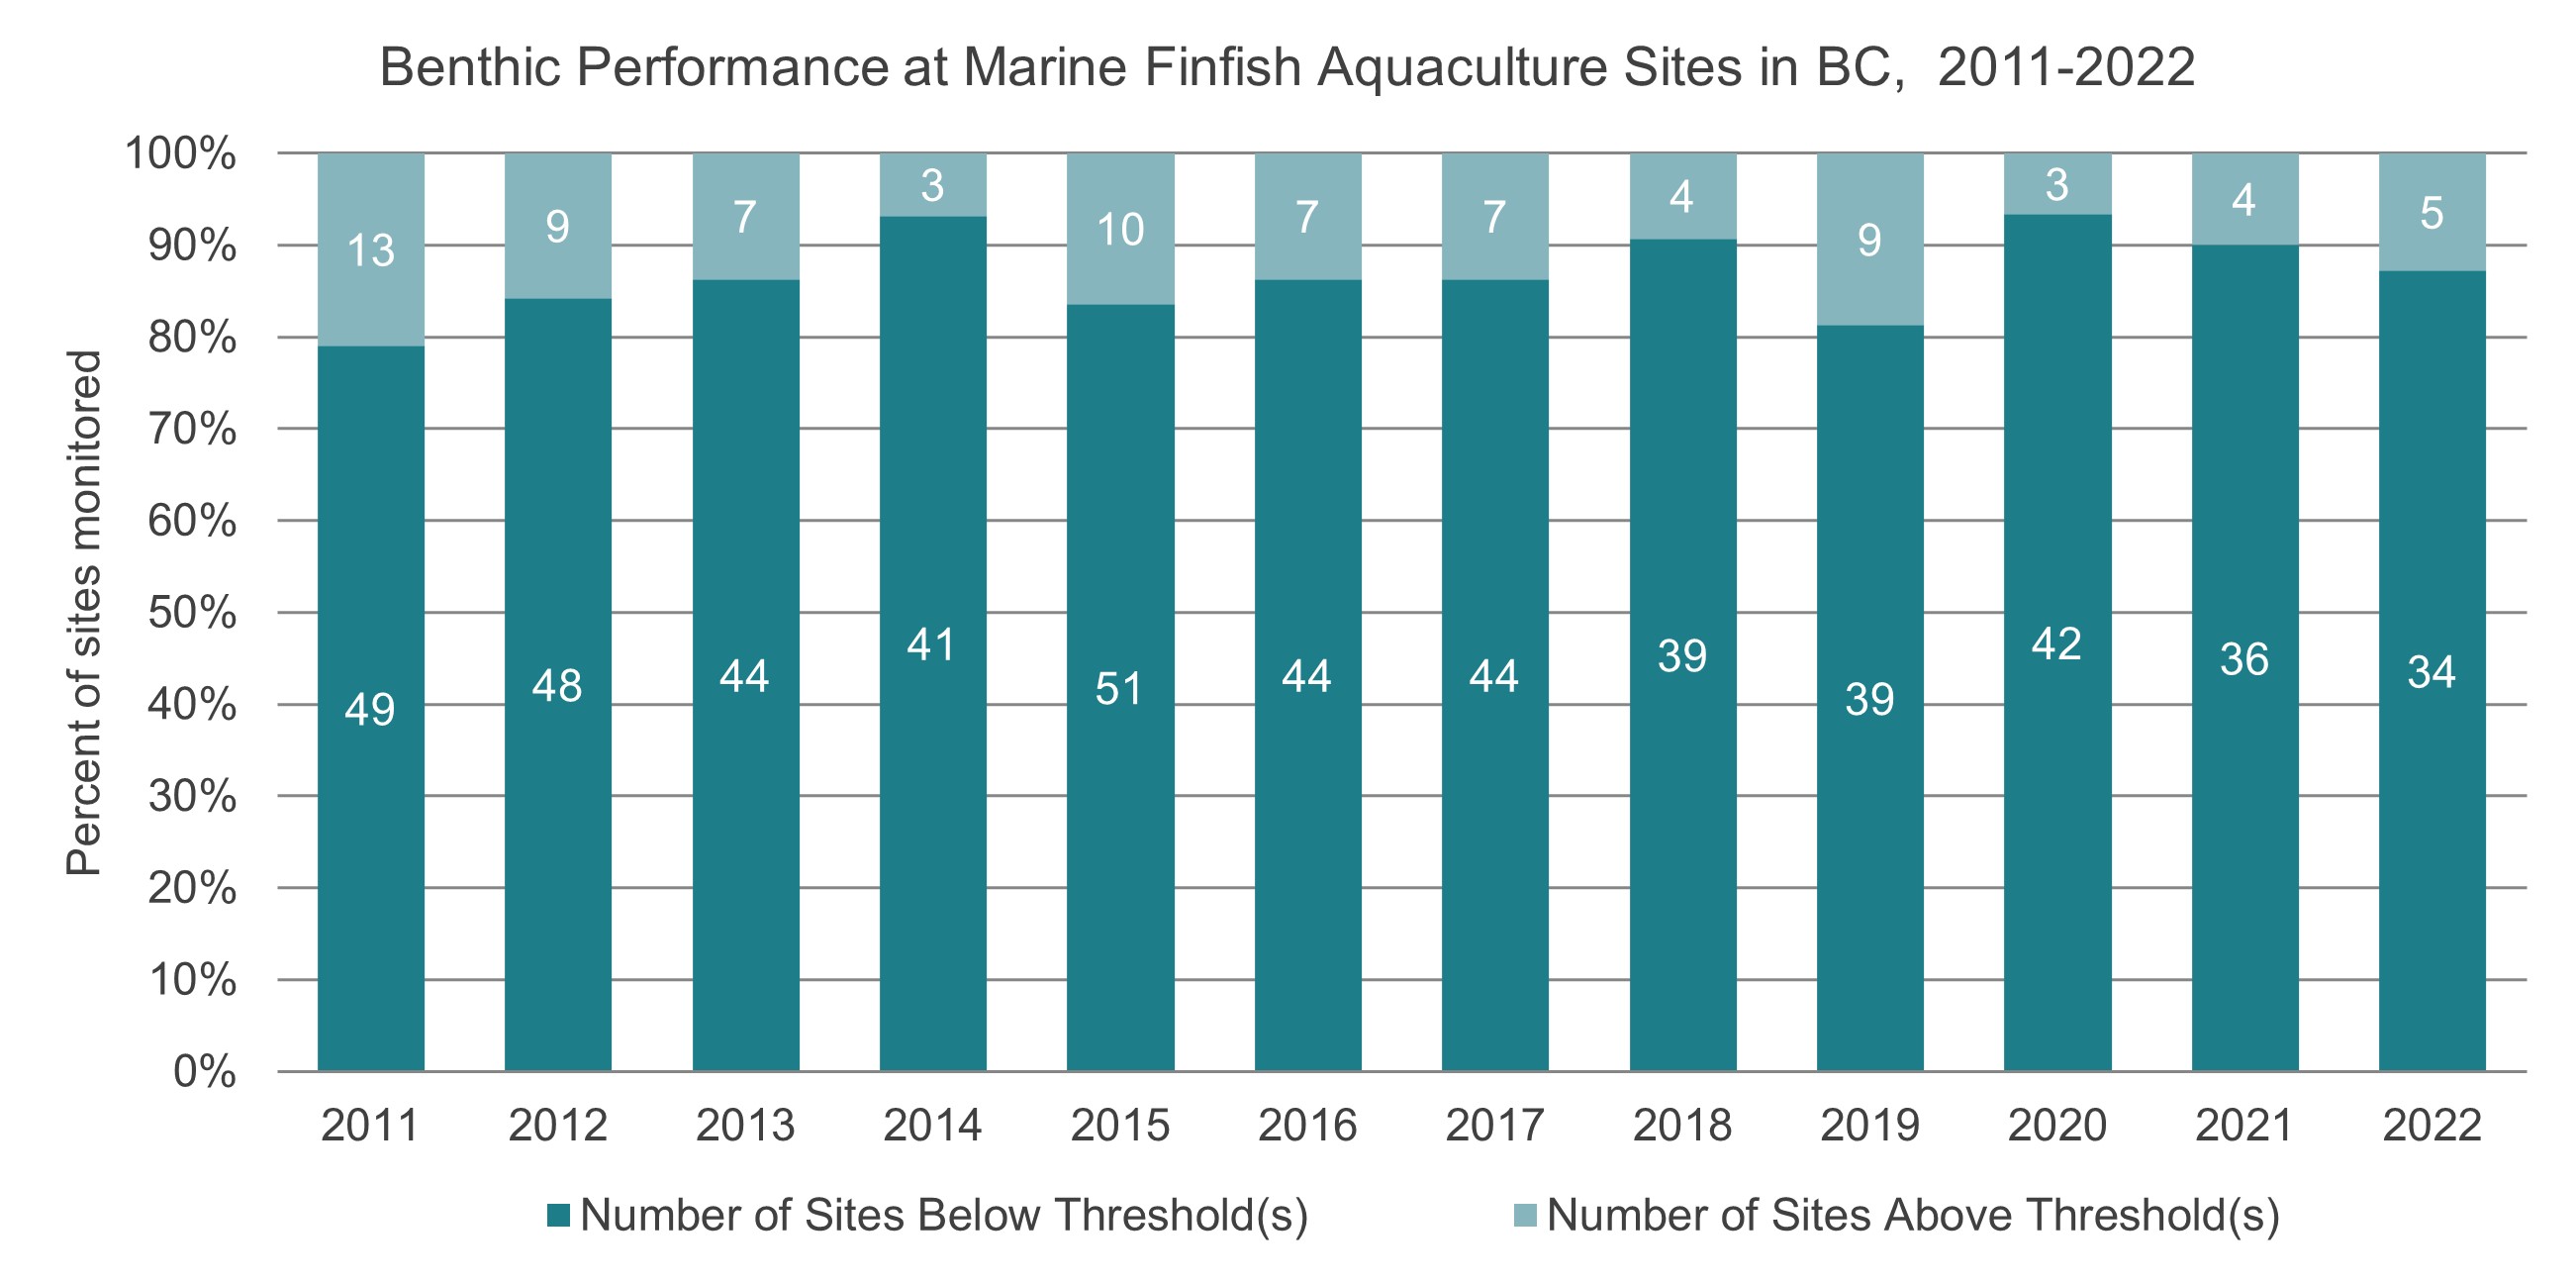 Benthic performance at marine finfish aquaculture sites in BC, 2011 to 2022